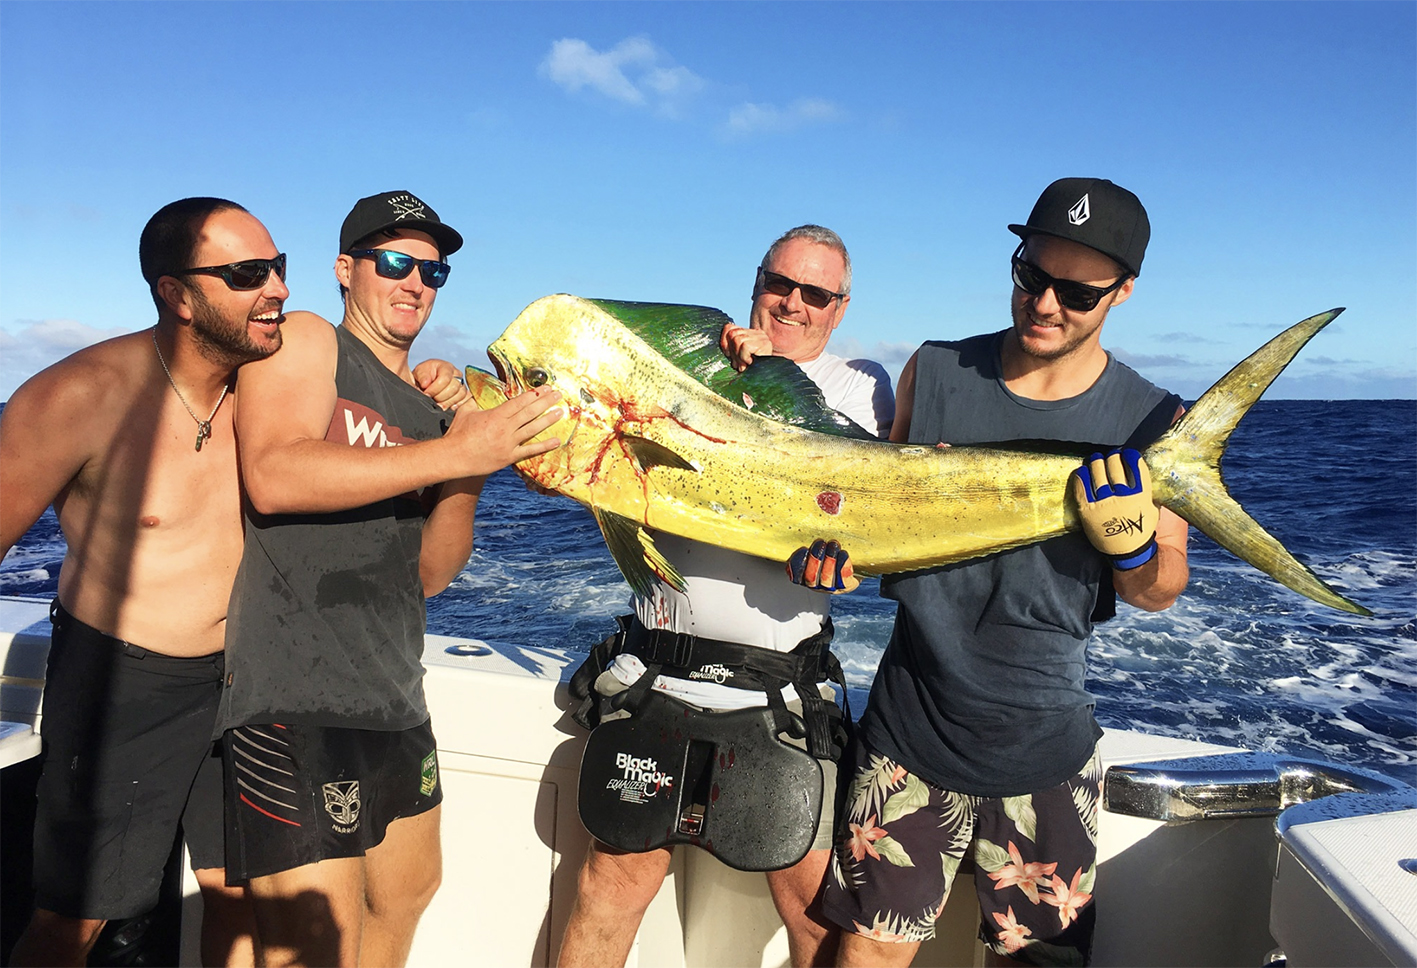 Across the Pacific That’ll be right, another mahi mahi for the boys